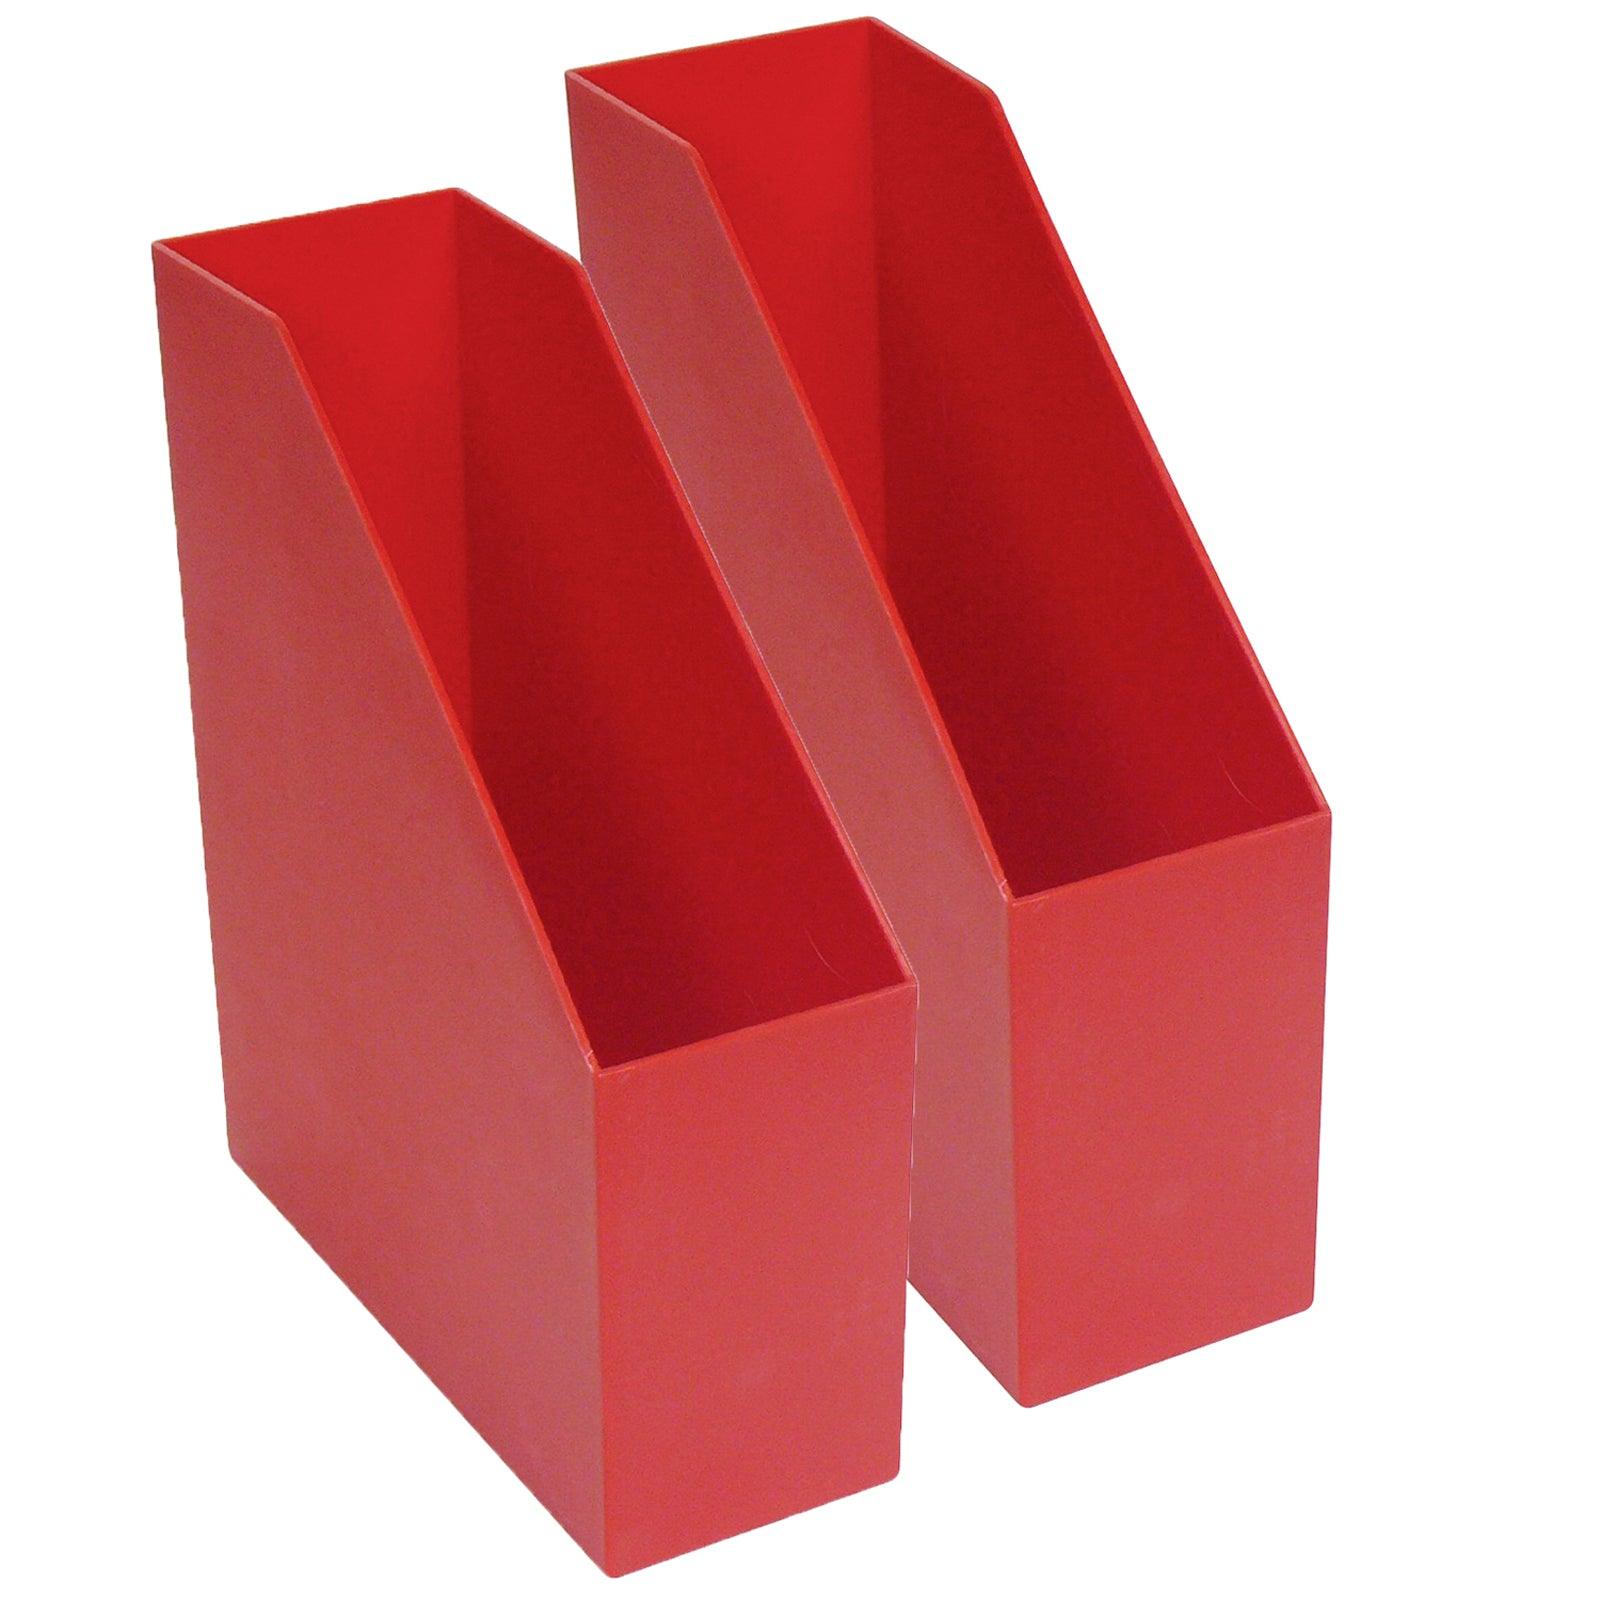 Magazine File, Red, Pack of 2 - Loomini